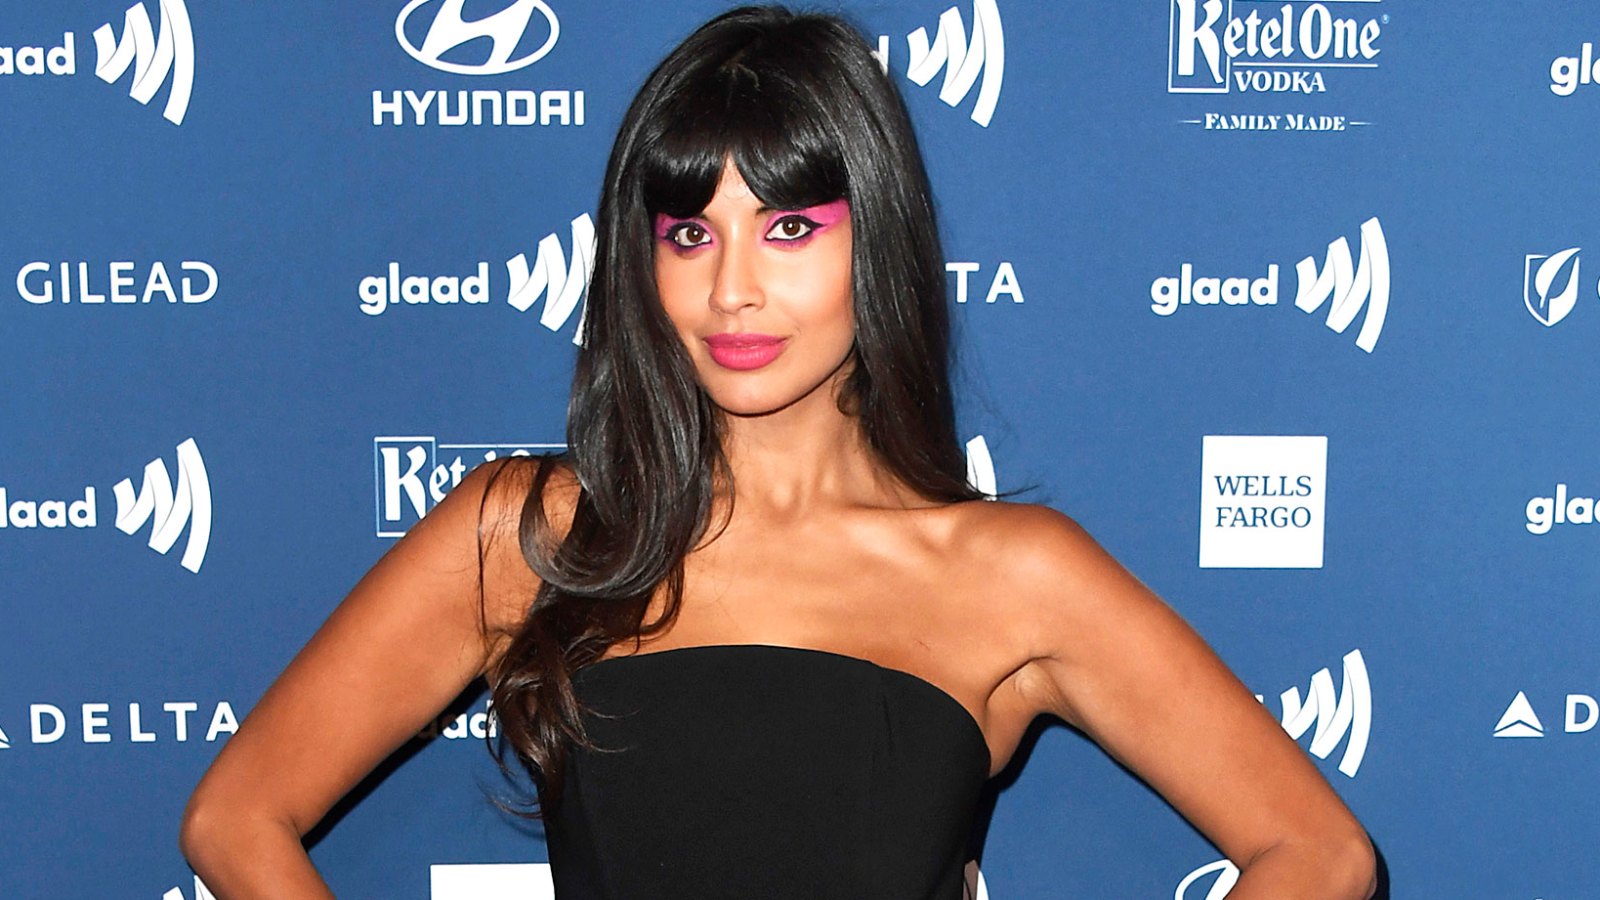 Jameela Jamil Criticized High-Fashion Designers for Making Sample Sizes Too Small